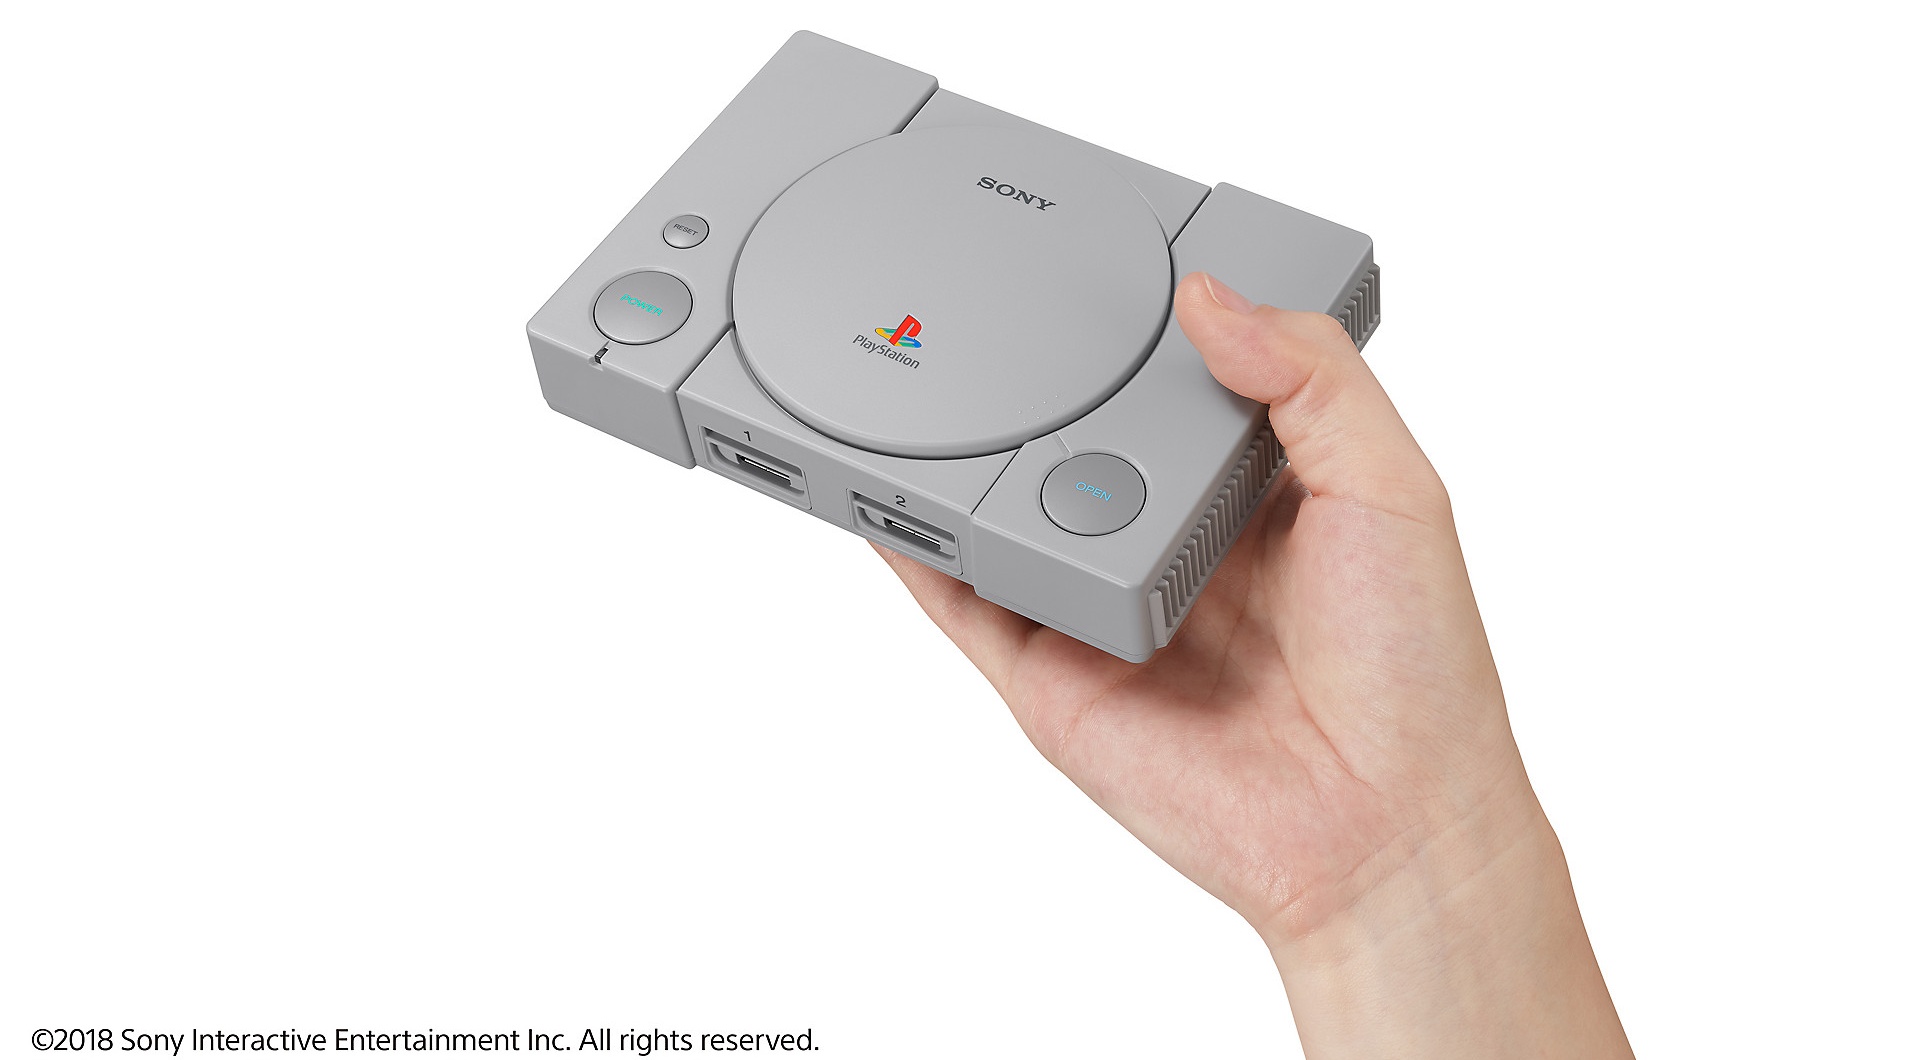 Hand holding the new PlayStation Classic console in front of a white background.